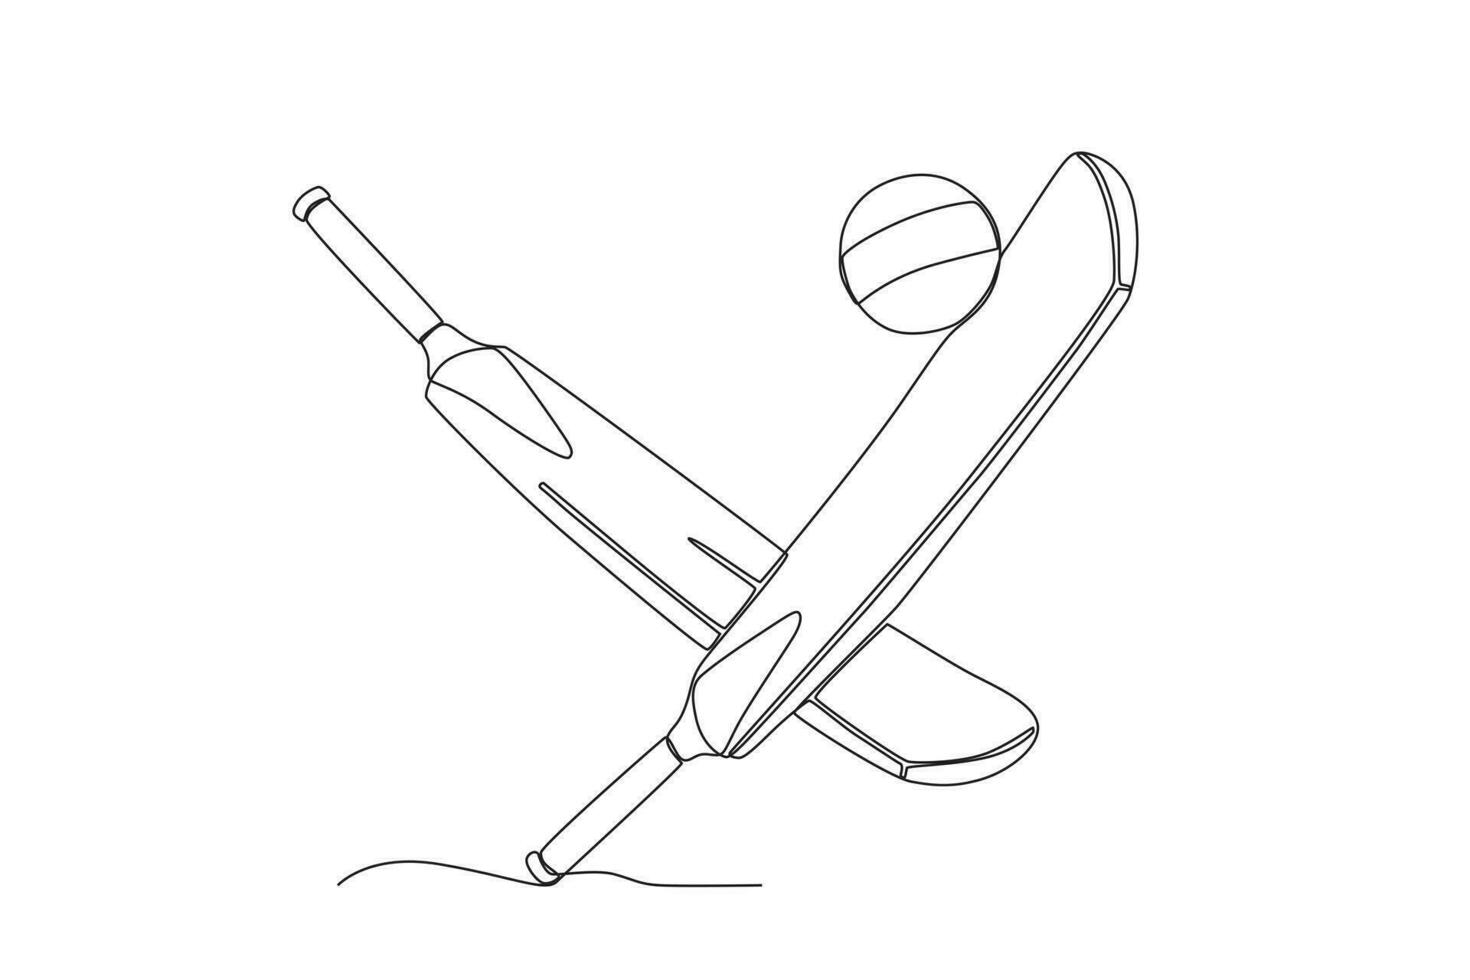 Illustration of two bats and a cricket ball vector